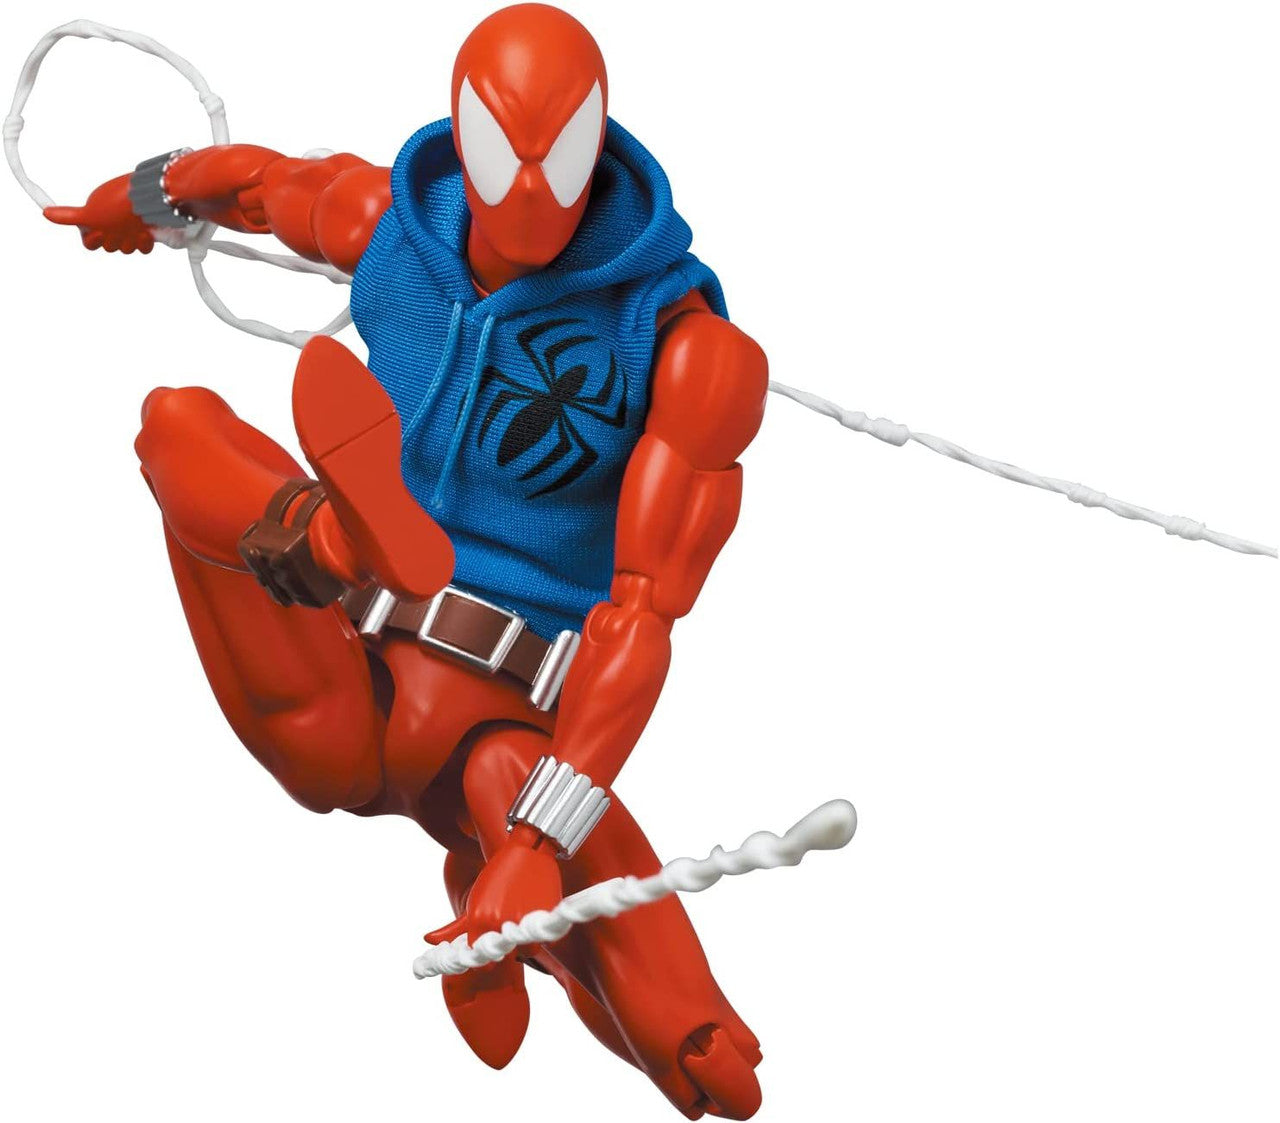 MAFEX No.186 Scarlet Spider Action Figure (The Amazing Spider-Man Comic Version)